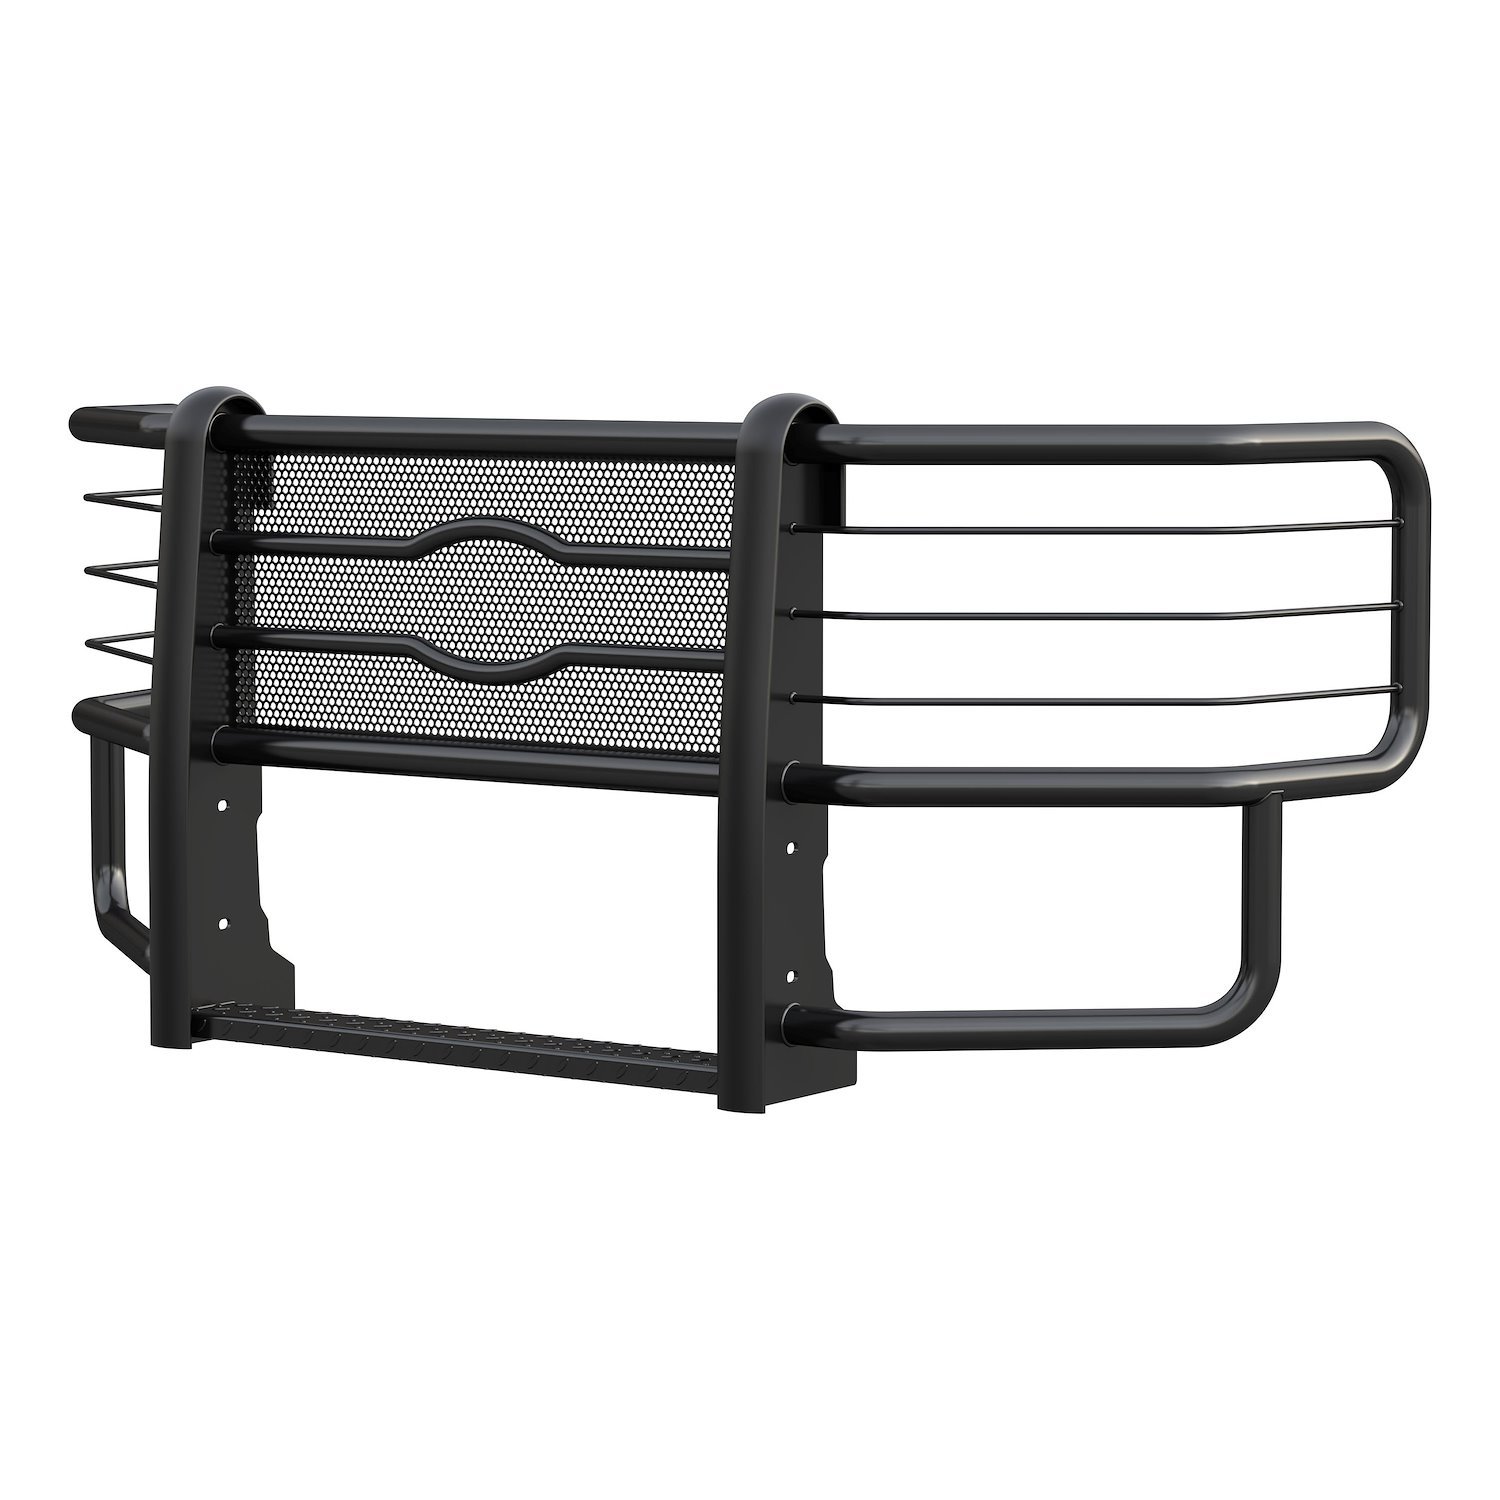 321523 Prowler Max Black Steel Grille Guard, Without Brackets